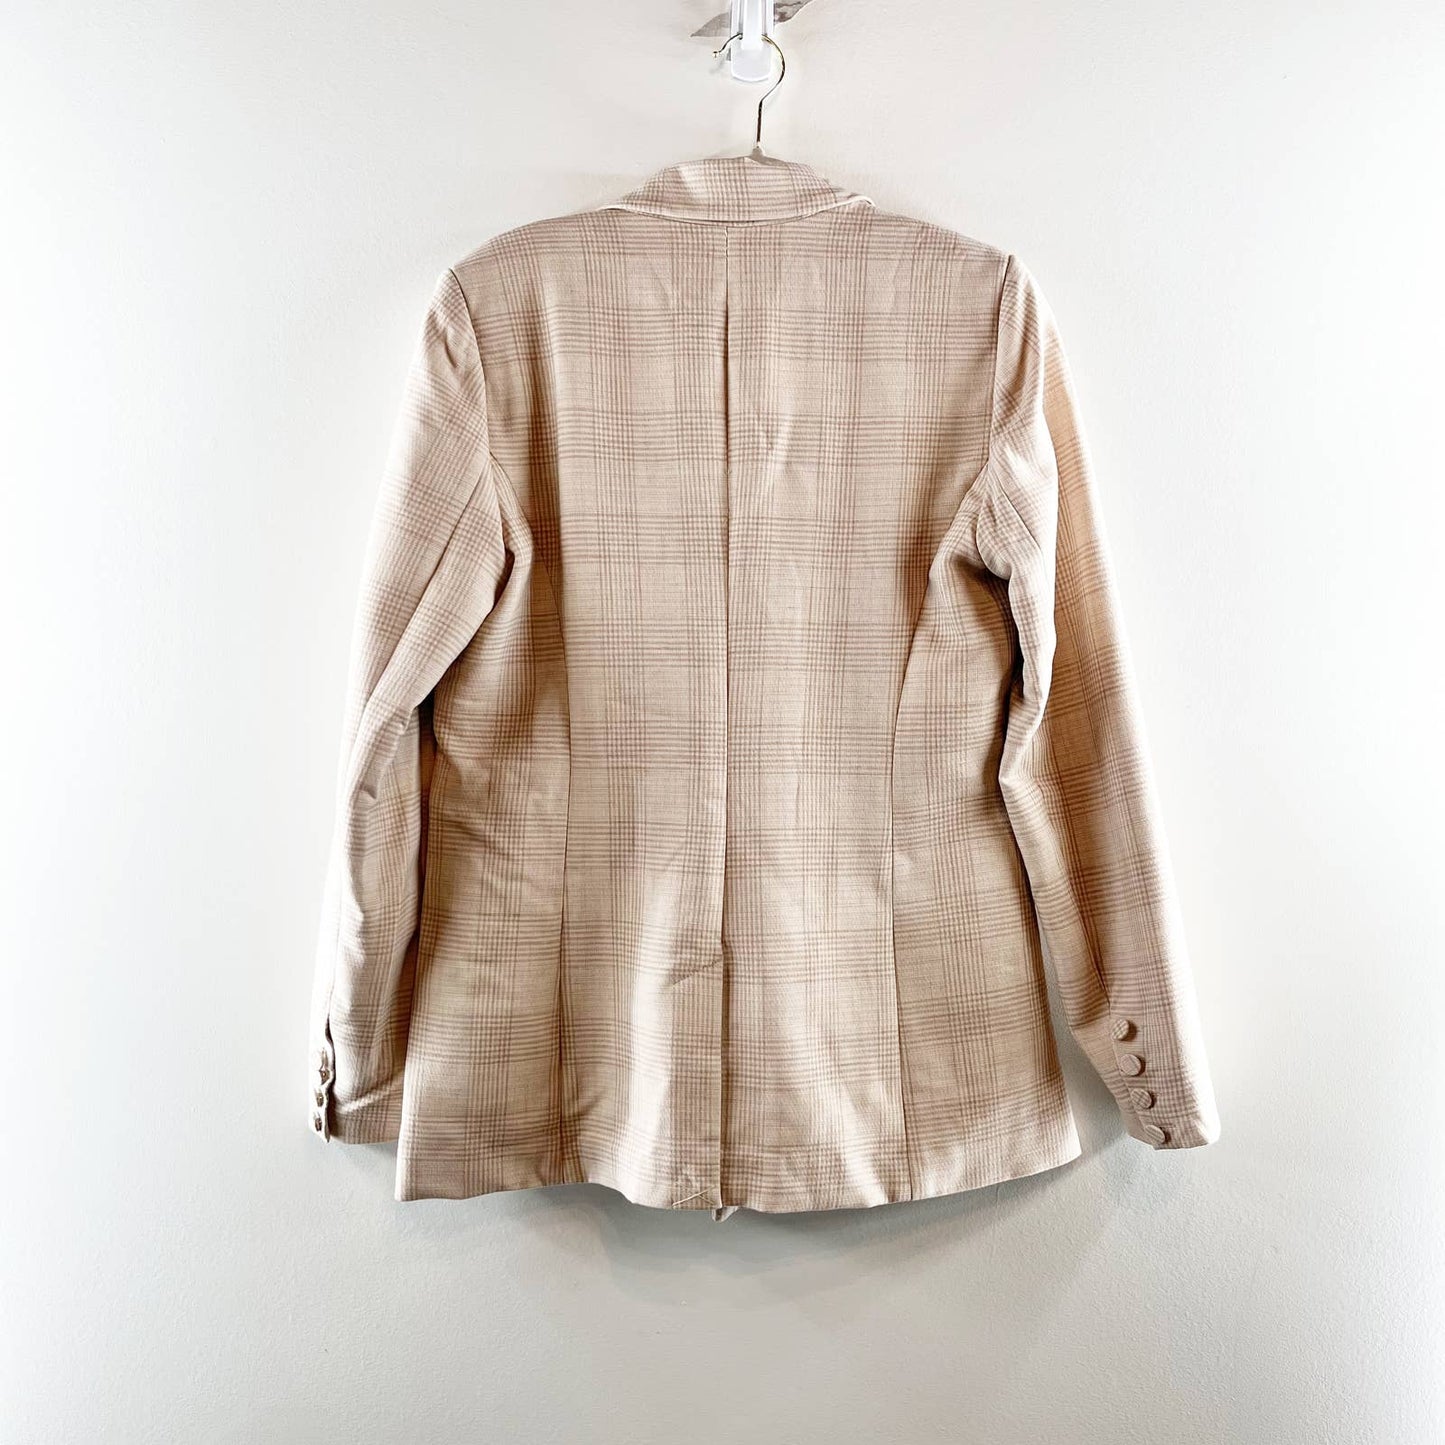 House of Harlow 1960 Plaid Notched Lapel Double Breasted Blazer Jacket Beige M